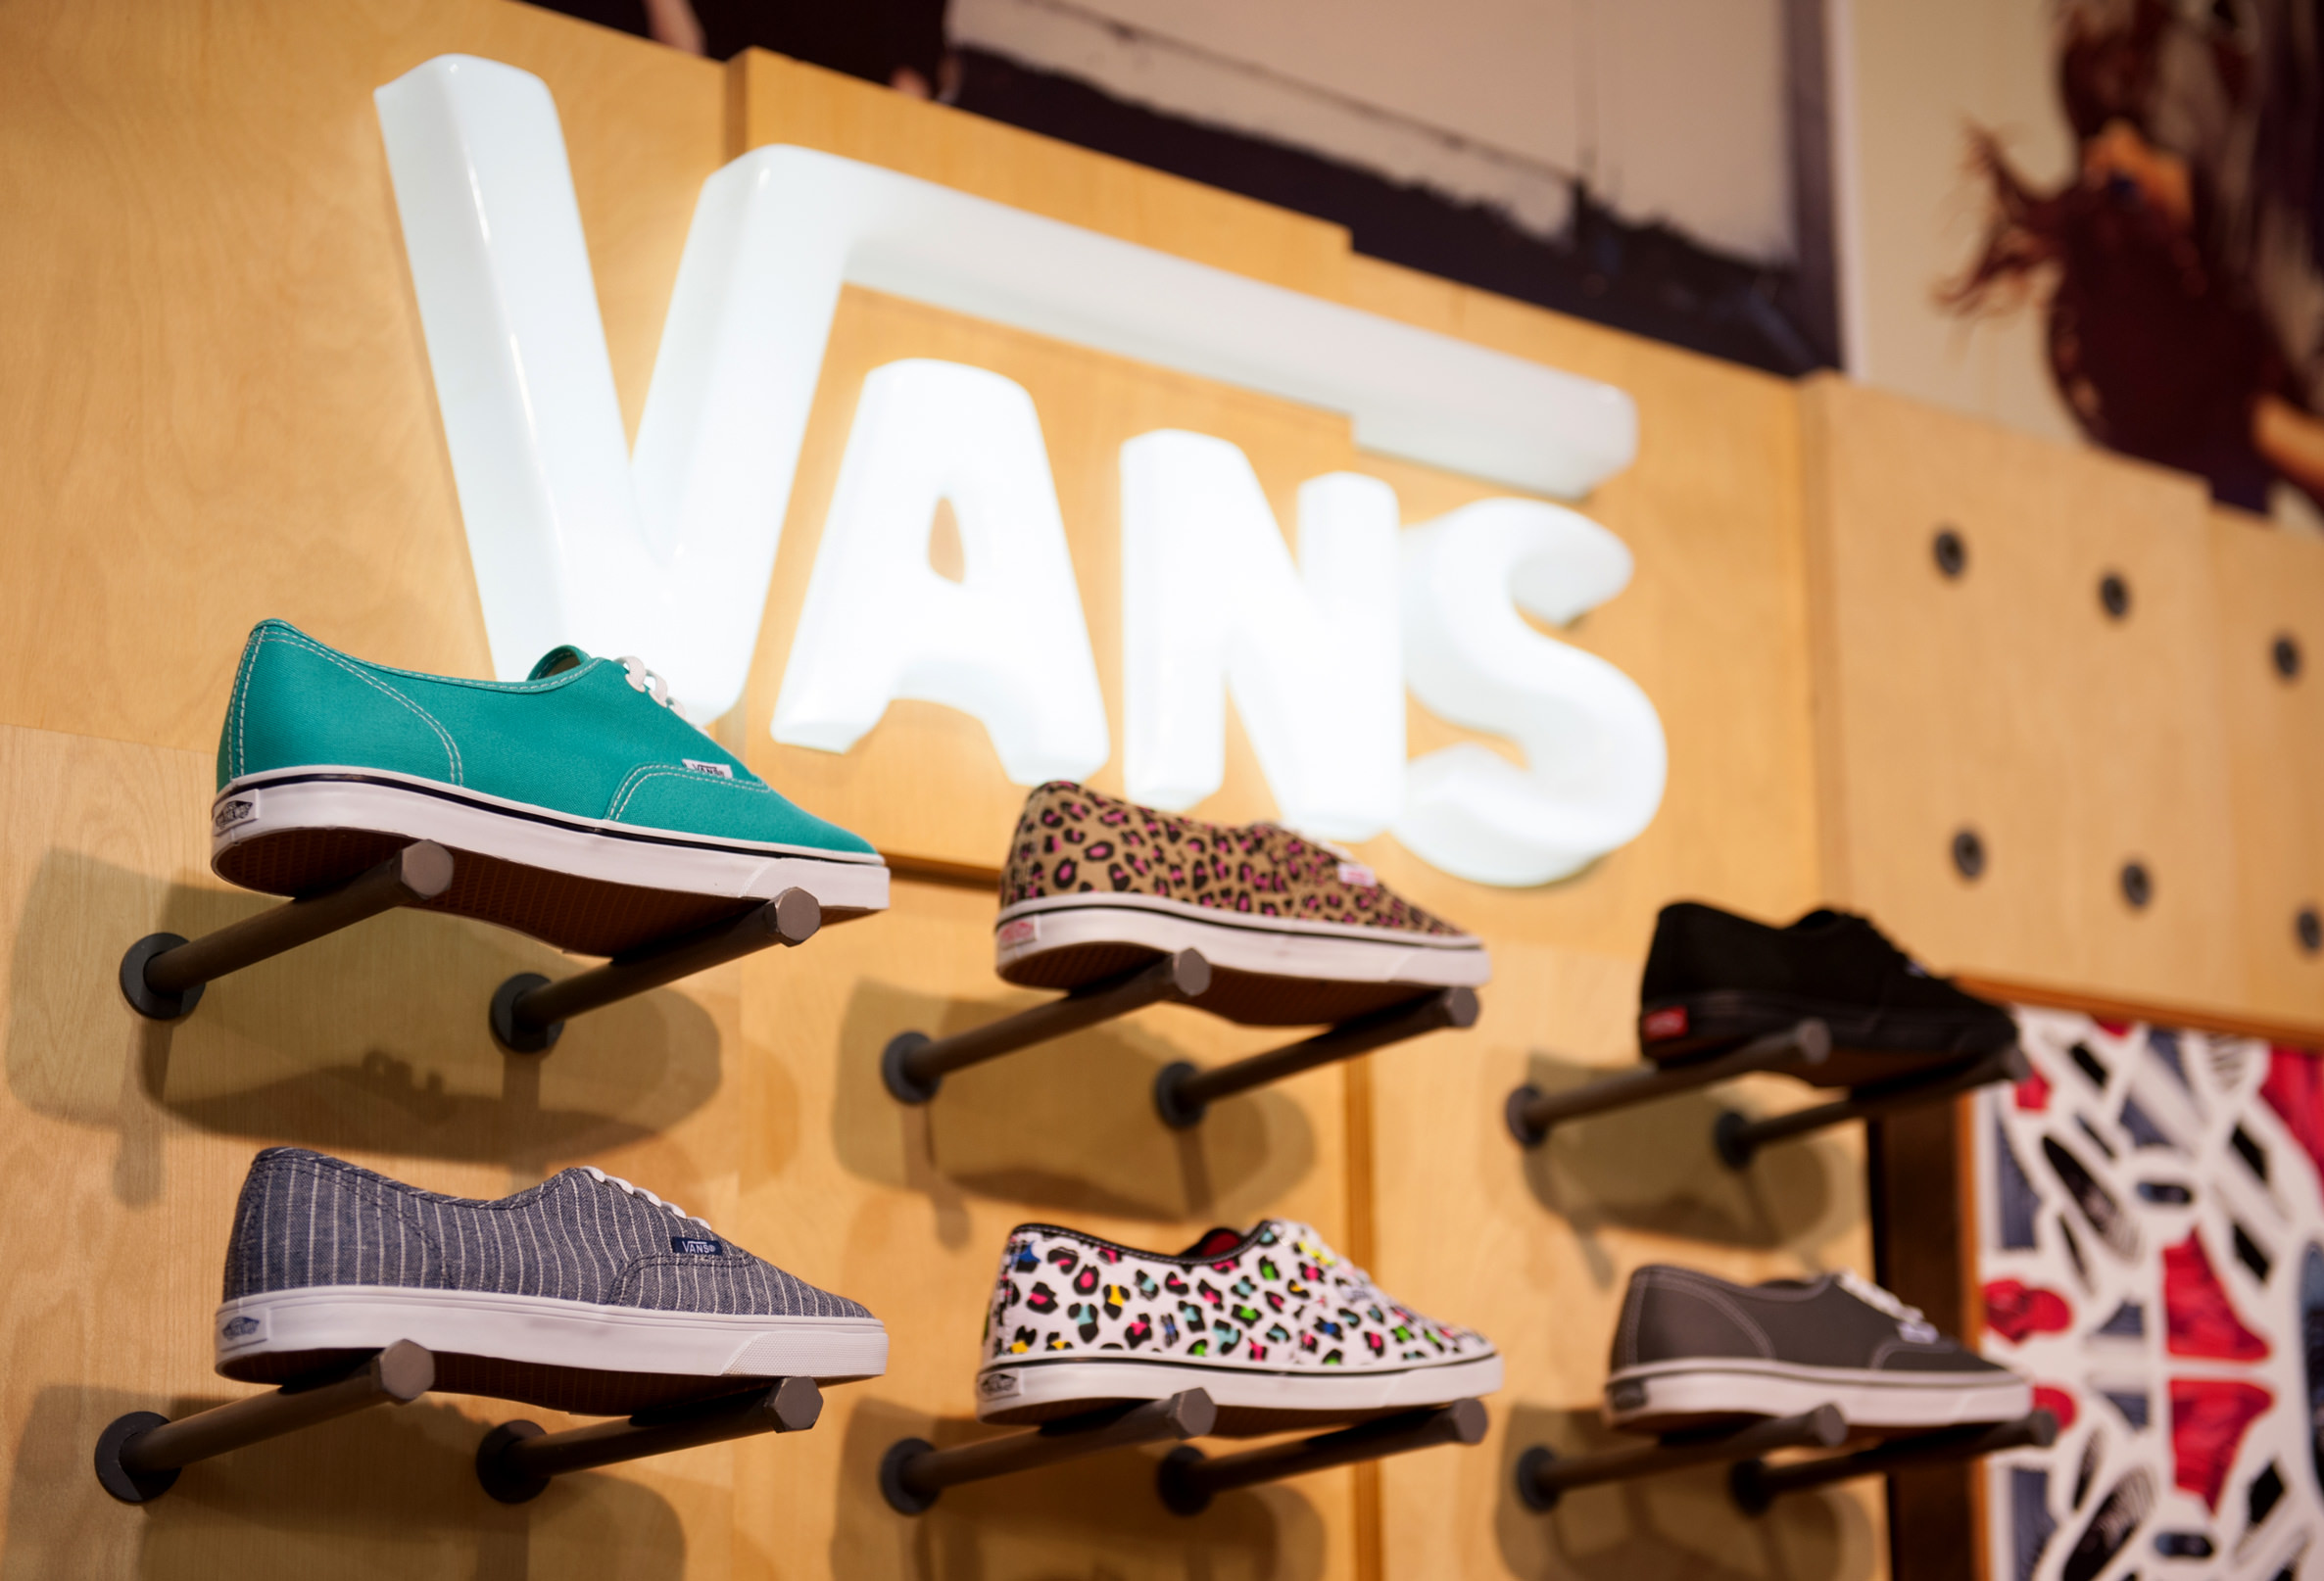 vans shoes yorkdale mall